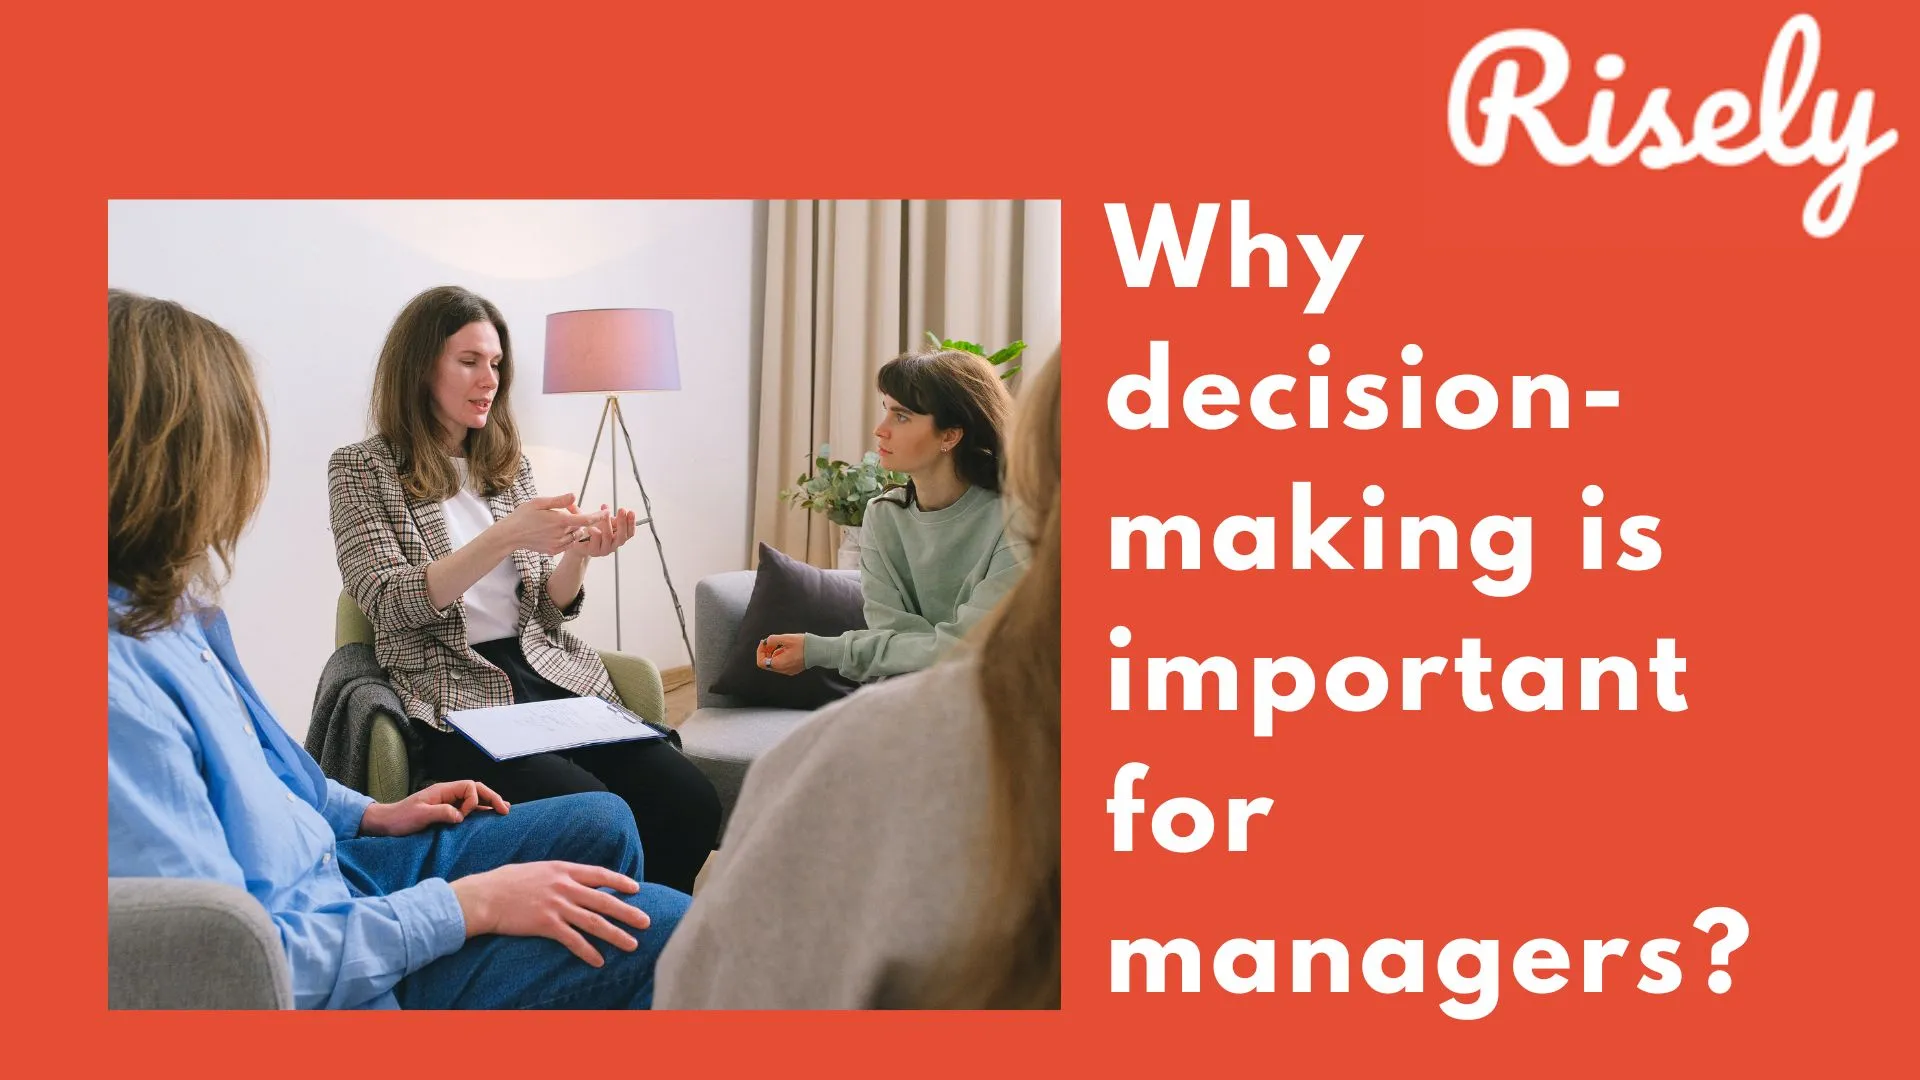 Why decision-making is important for managers?